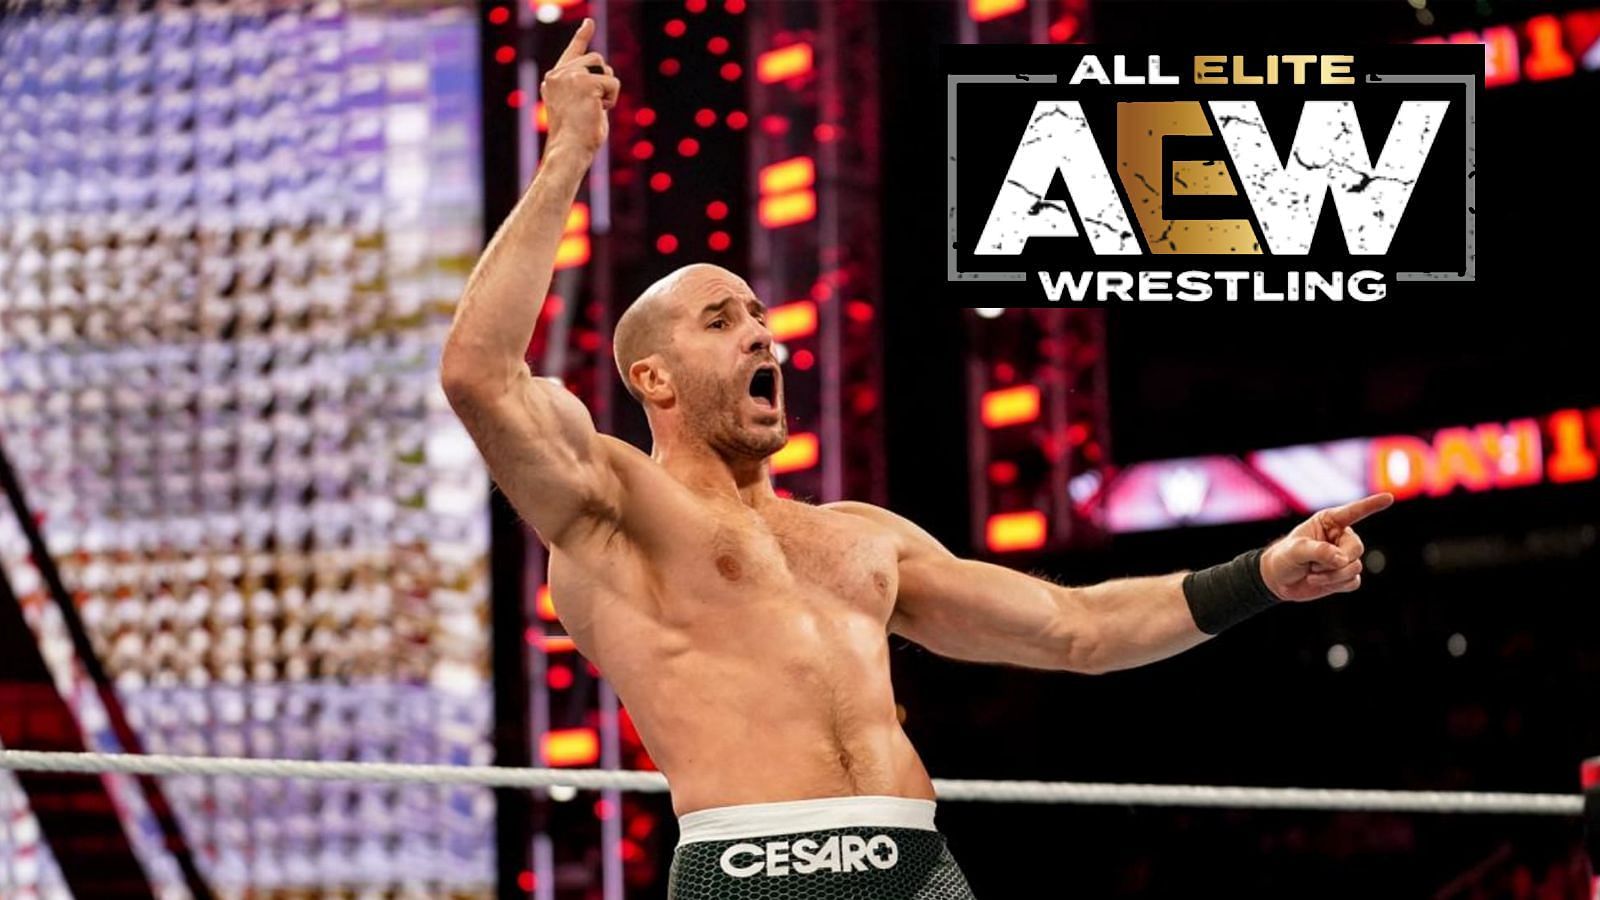 Could The Swiss Superman make his way to AEW?